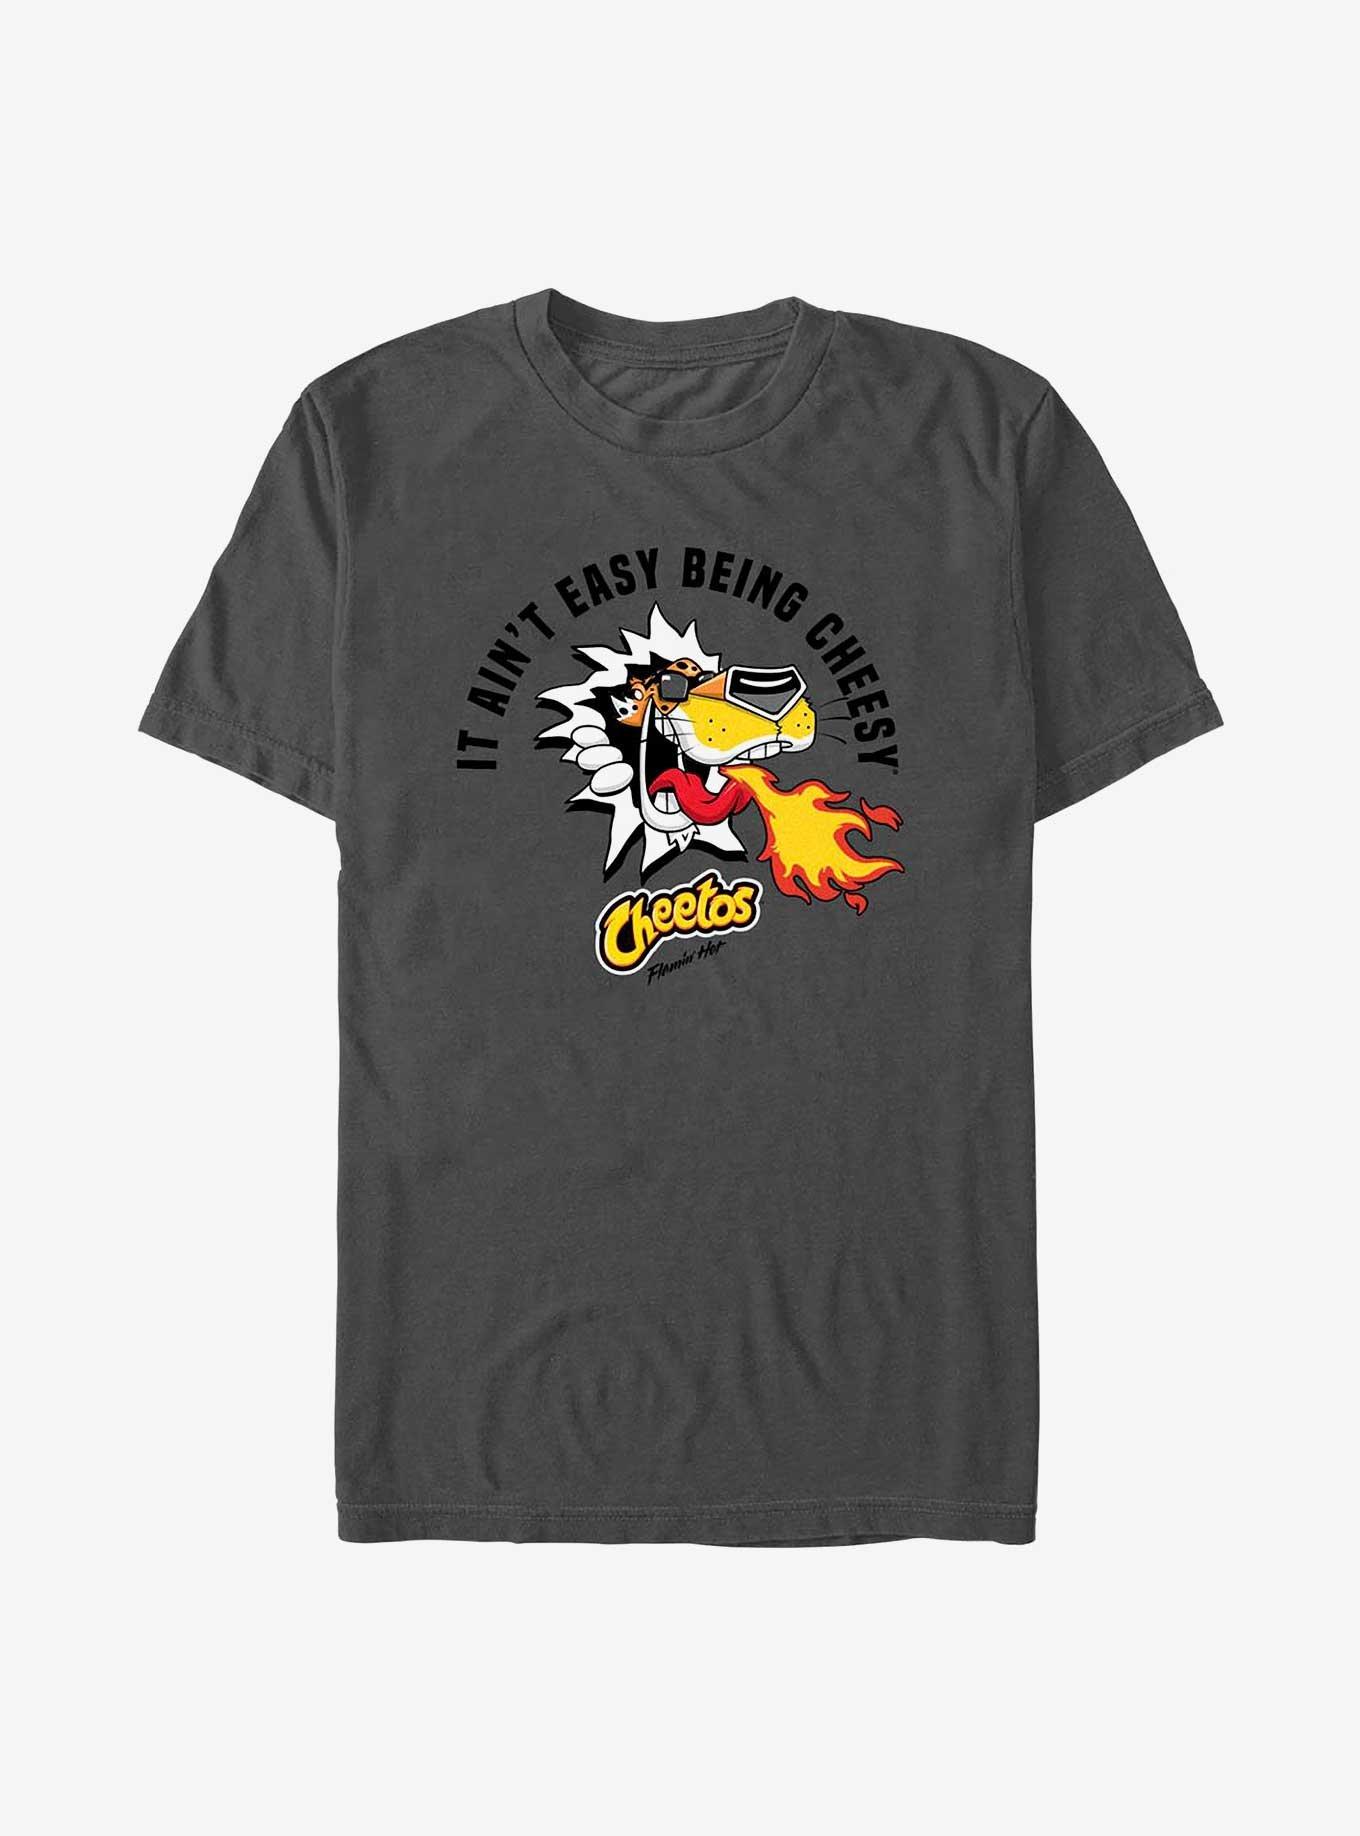 Cheetos Ain't Easy Being Cheesy T-Shirt, CHARCOAL, hi-res